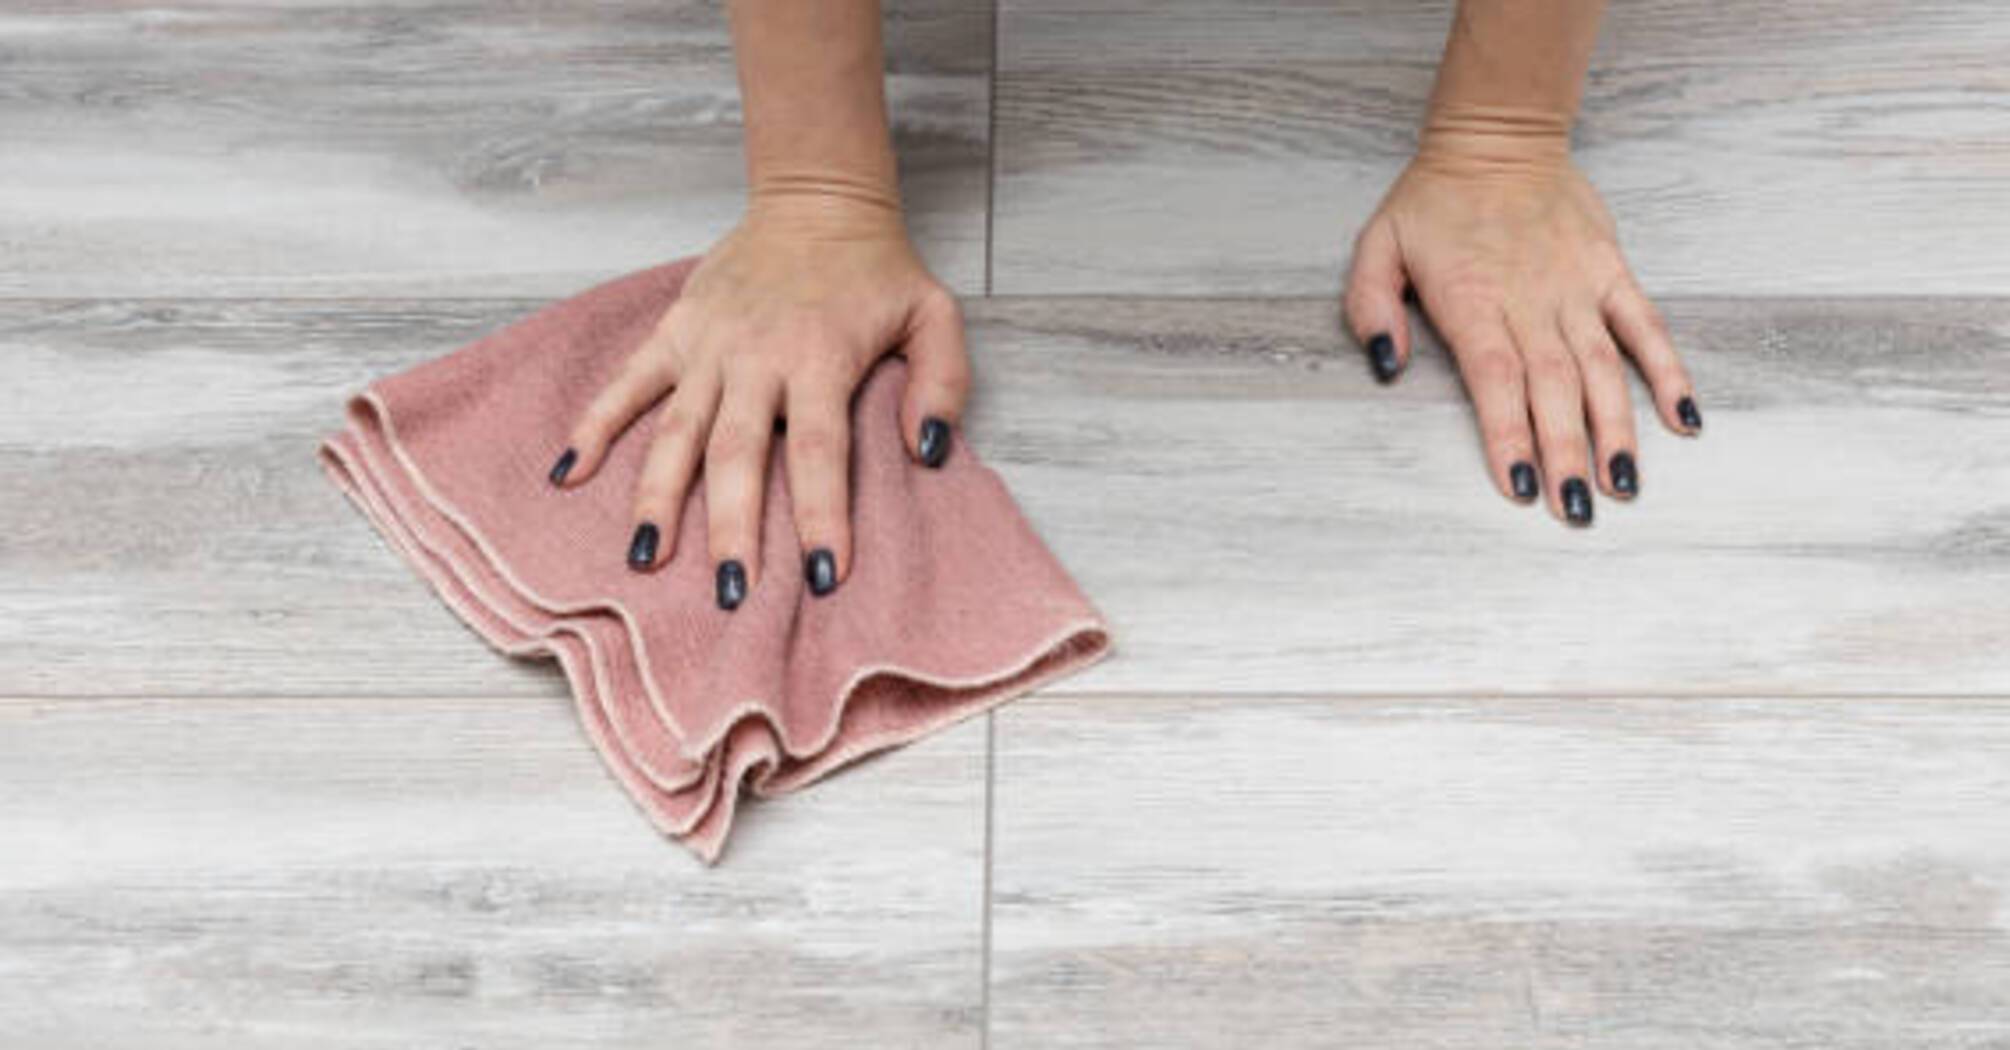 How to clean linoleum to shine: 3 effective life hacks